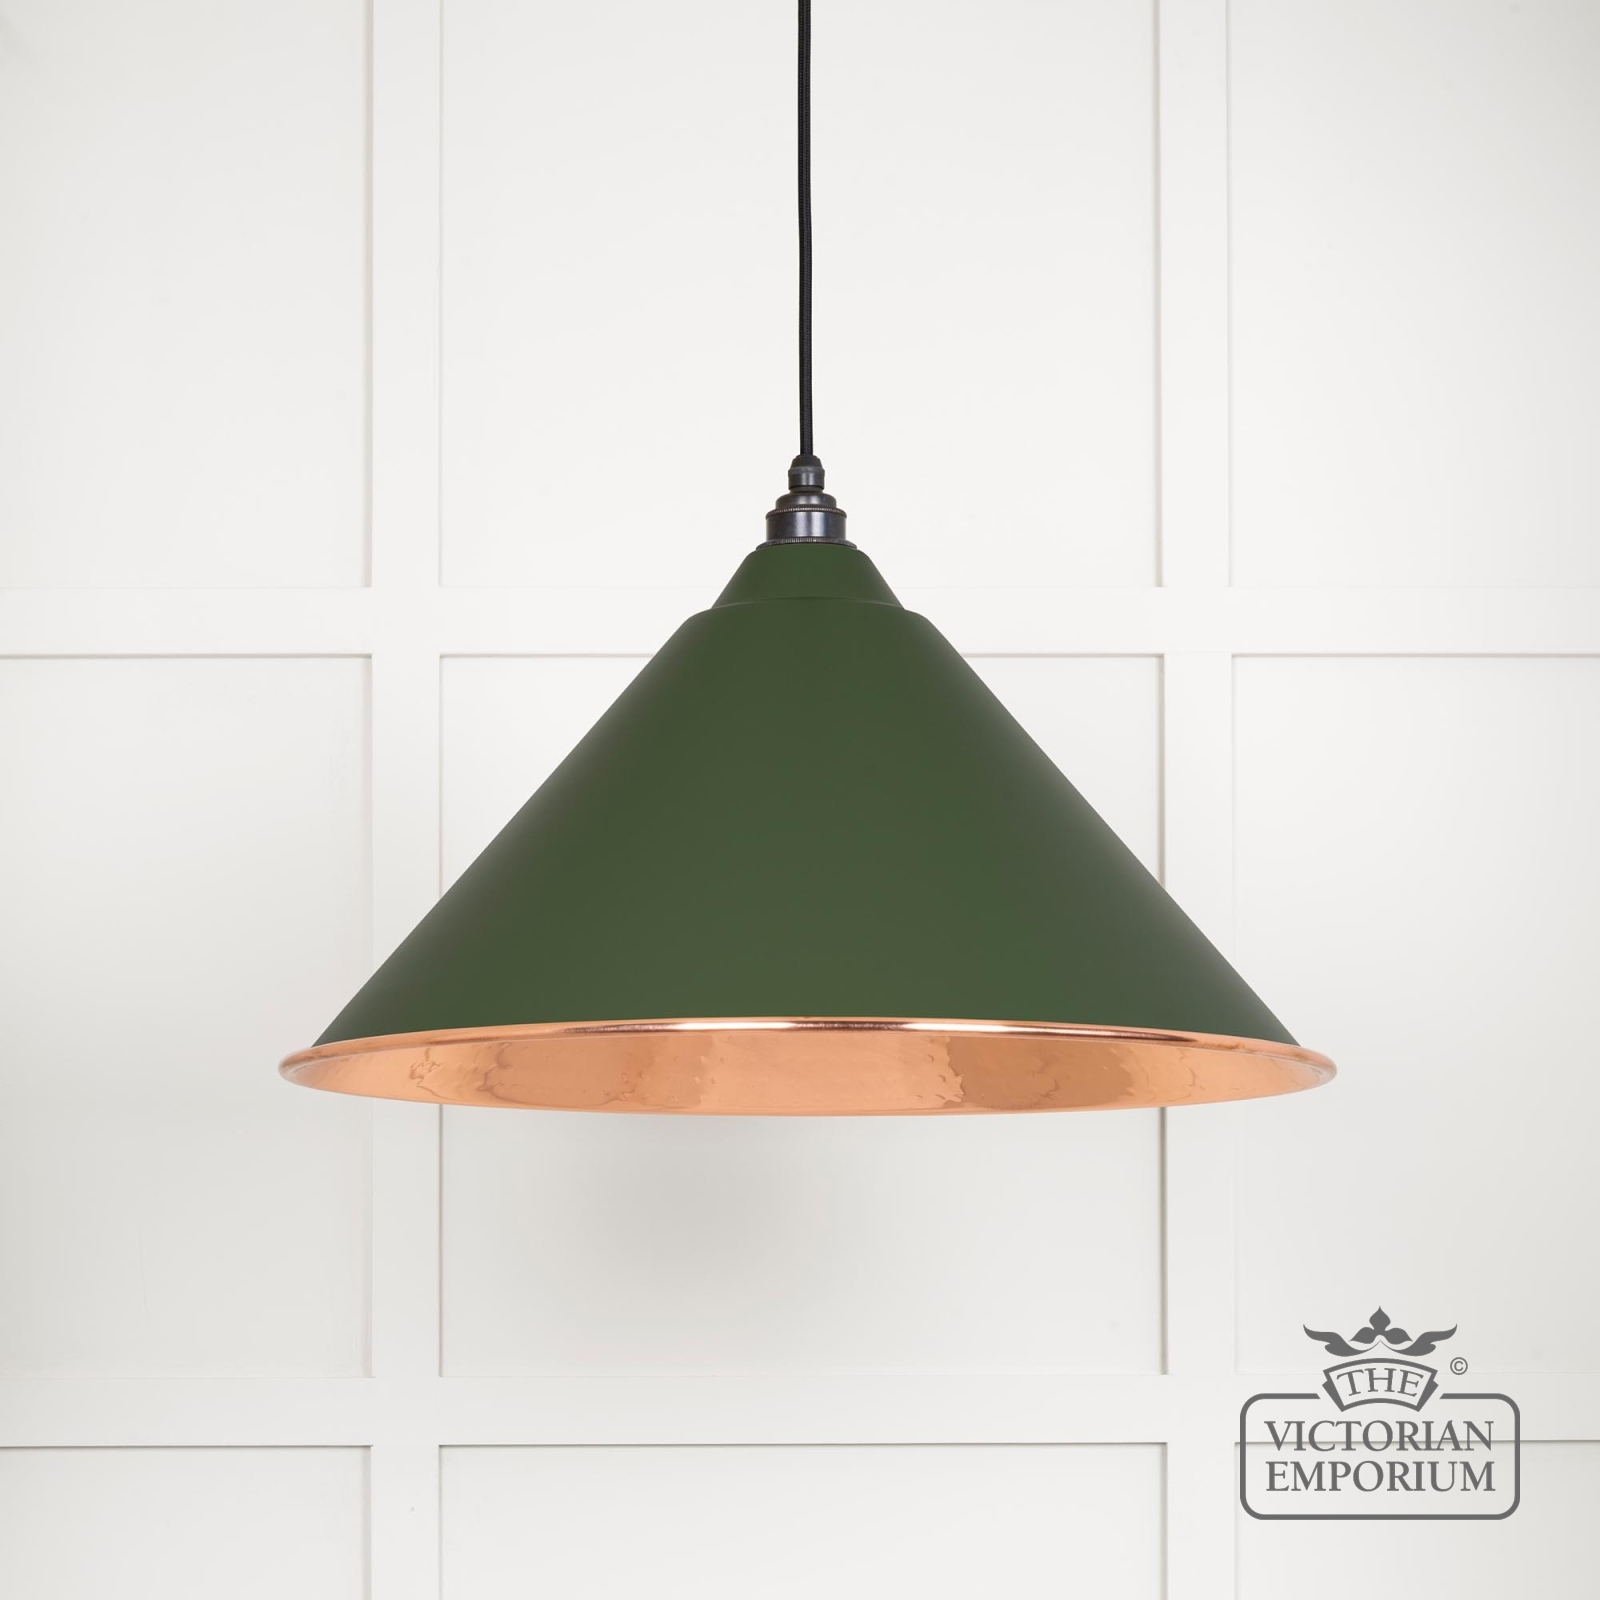 Hockliffe pendant light in Heath and hammered copper